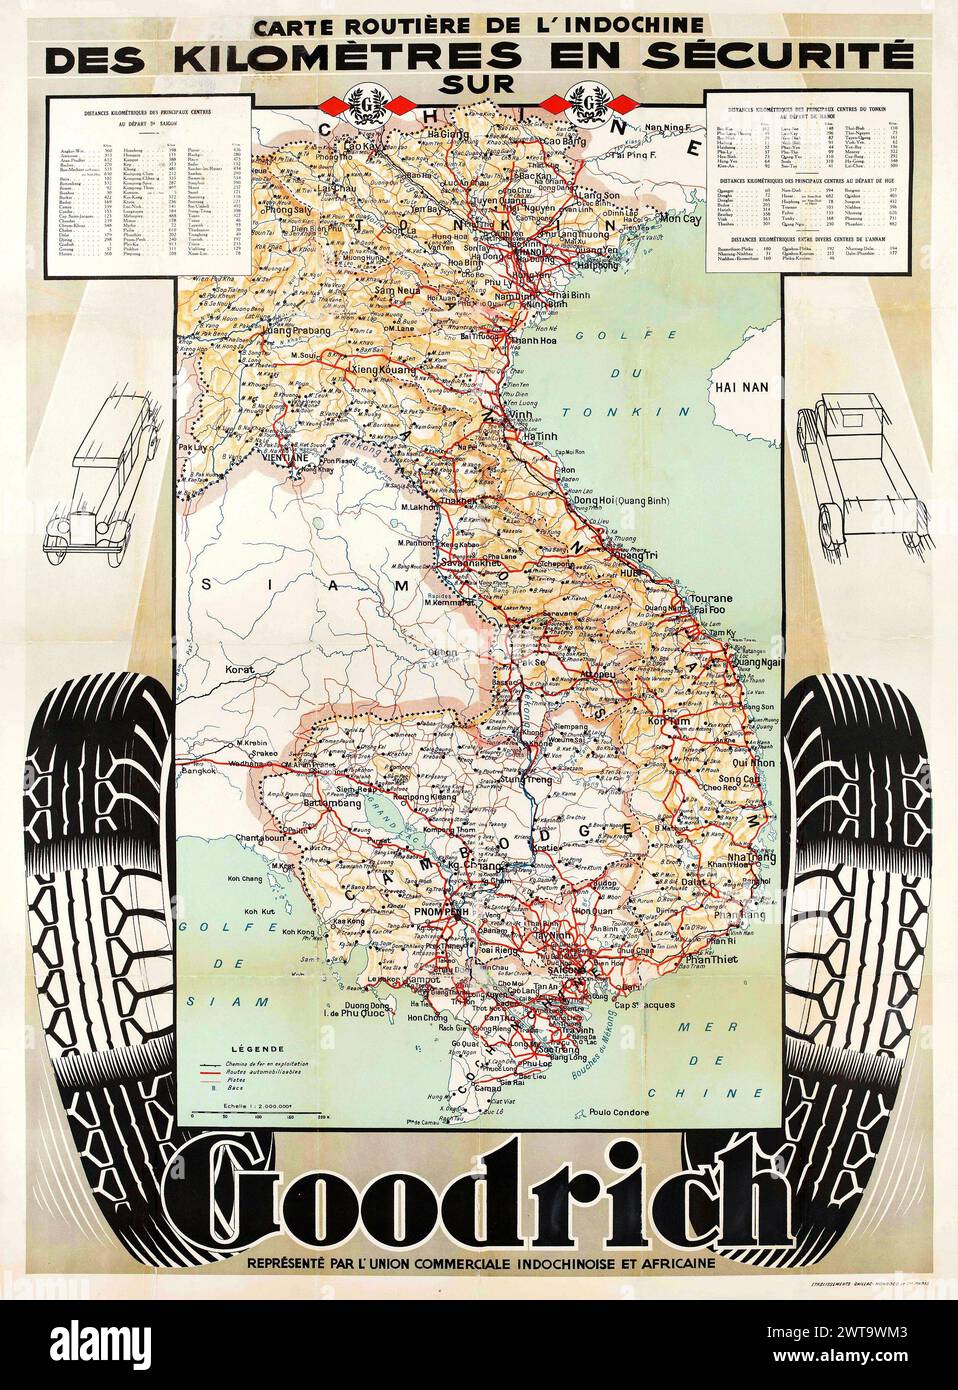 Vintage French Road Map of Indochina, Vietnam,  Cambodia, Laos on a Goodrich Tire Ad Poster. circa 1930s Stock Photo